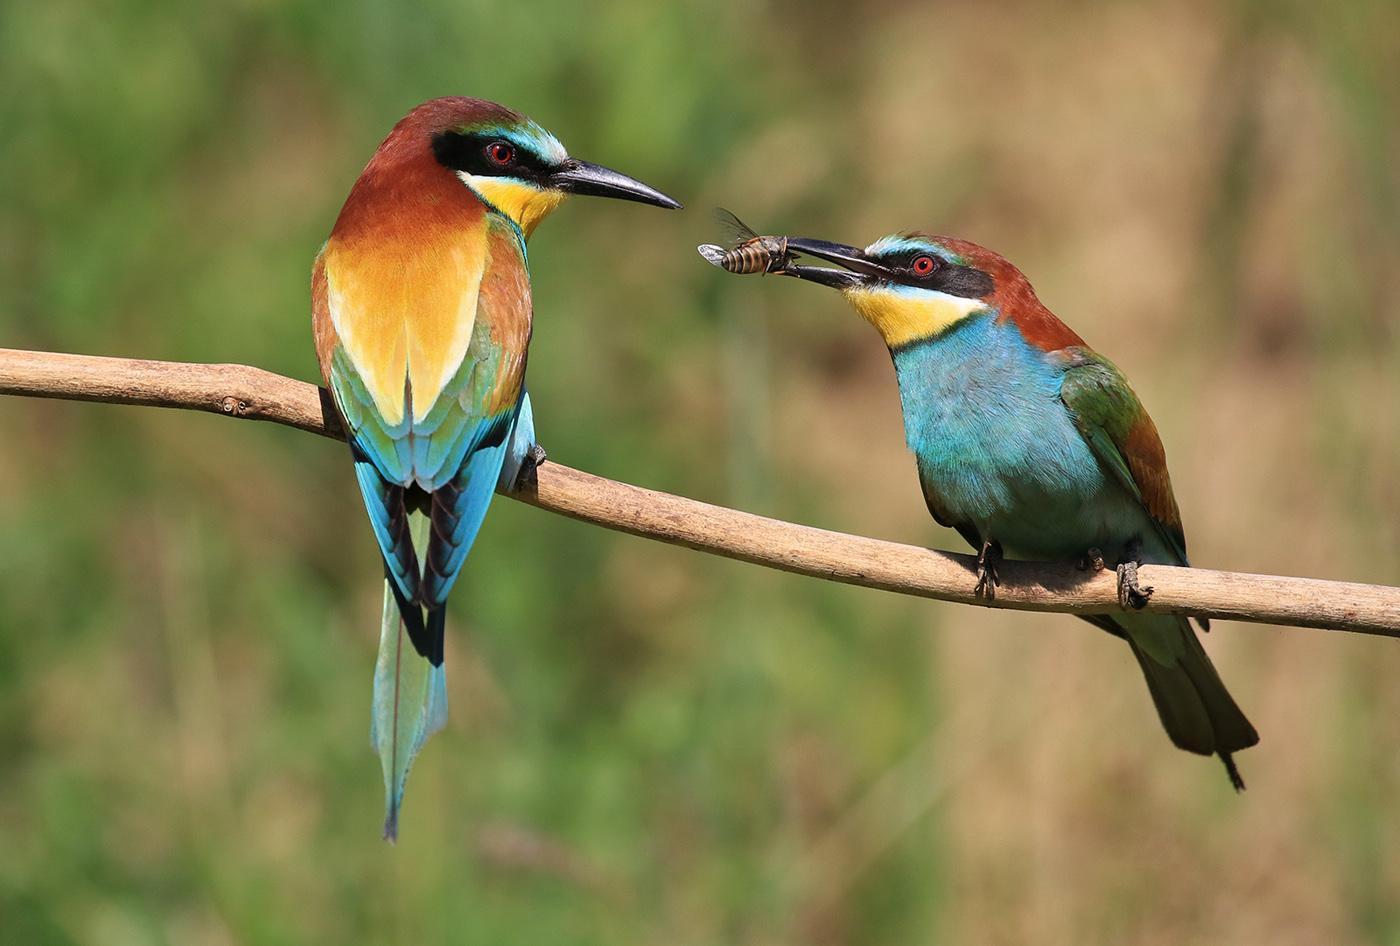 The Yeoman Cup Natural History (PDI) - European Bee-eaters taking food offering by Pat Kearton